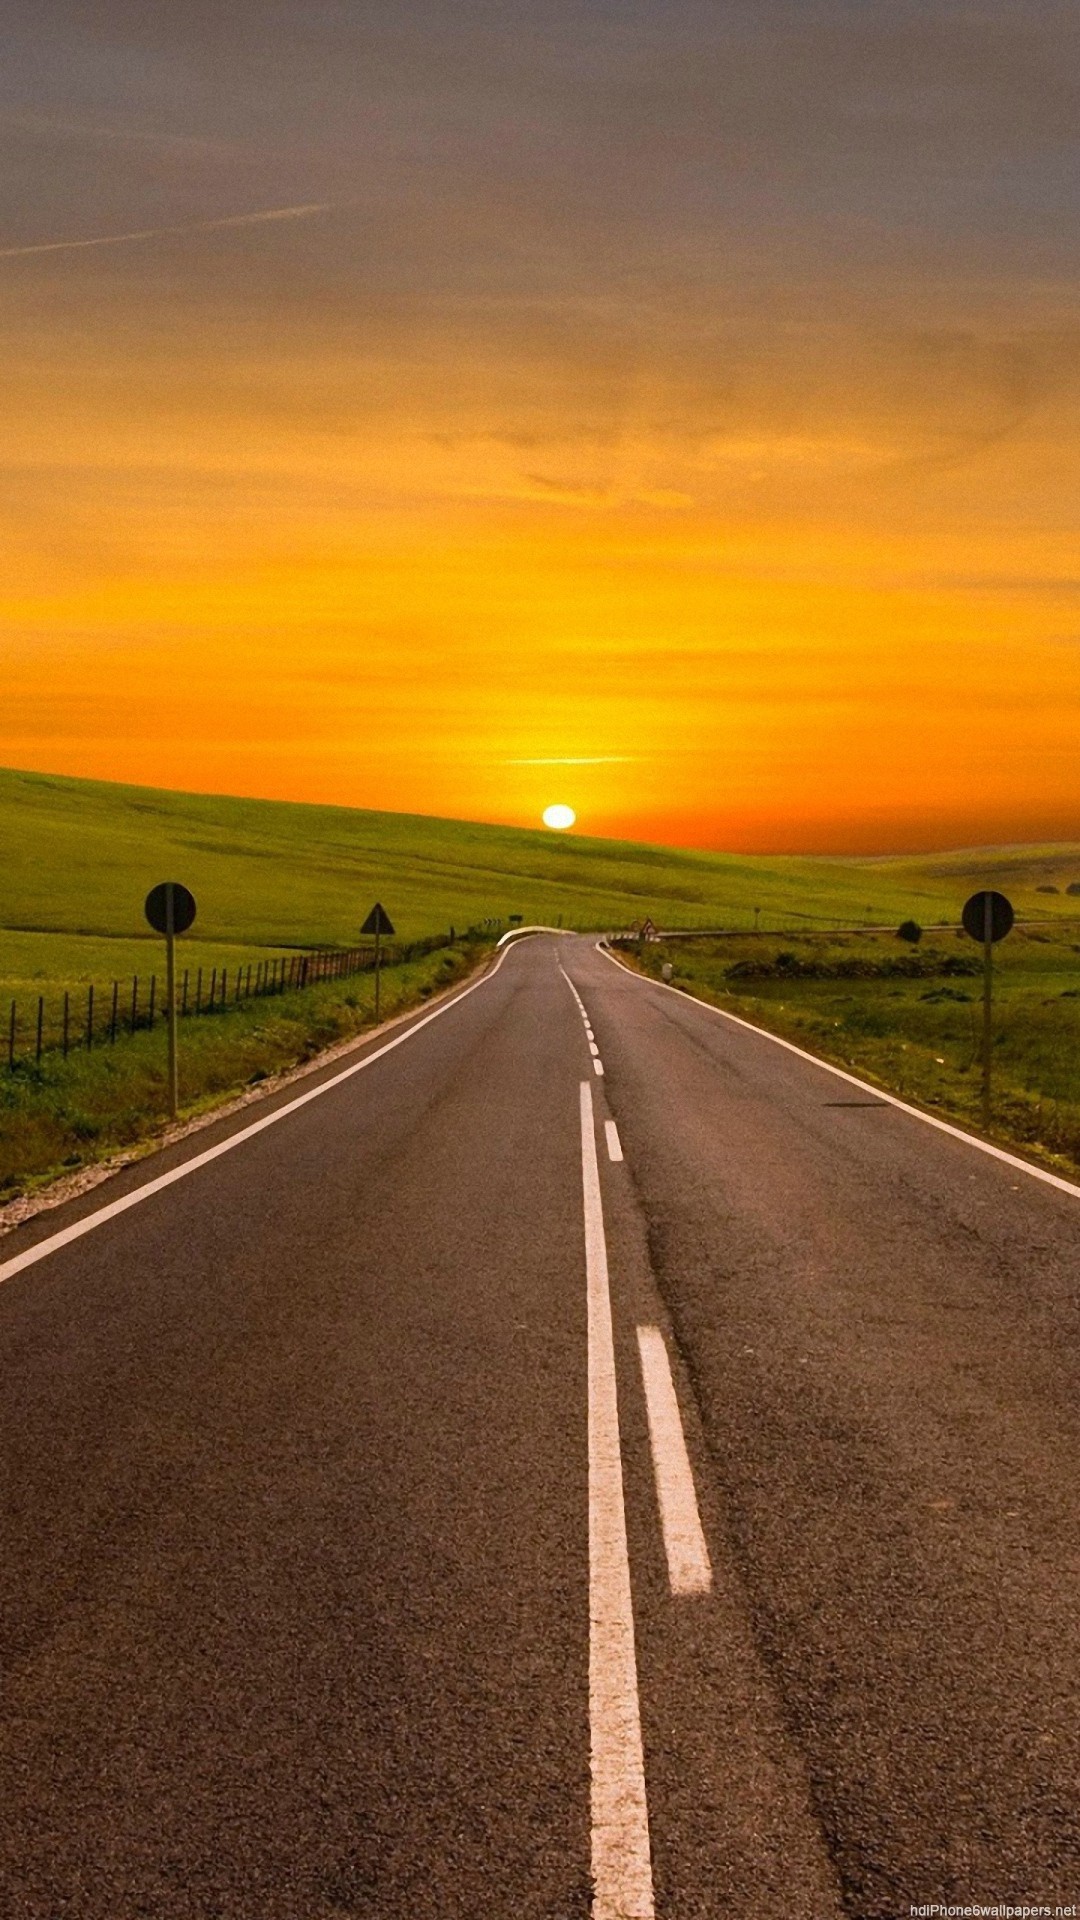 Sunrise and road phone wallpapers images download